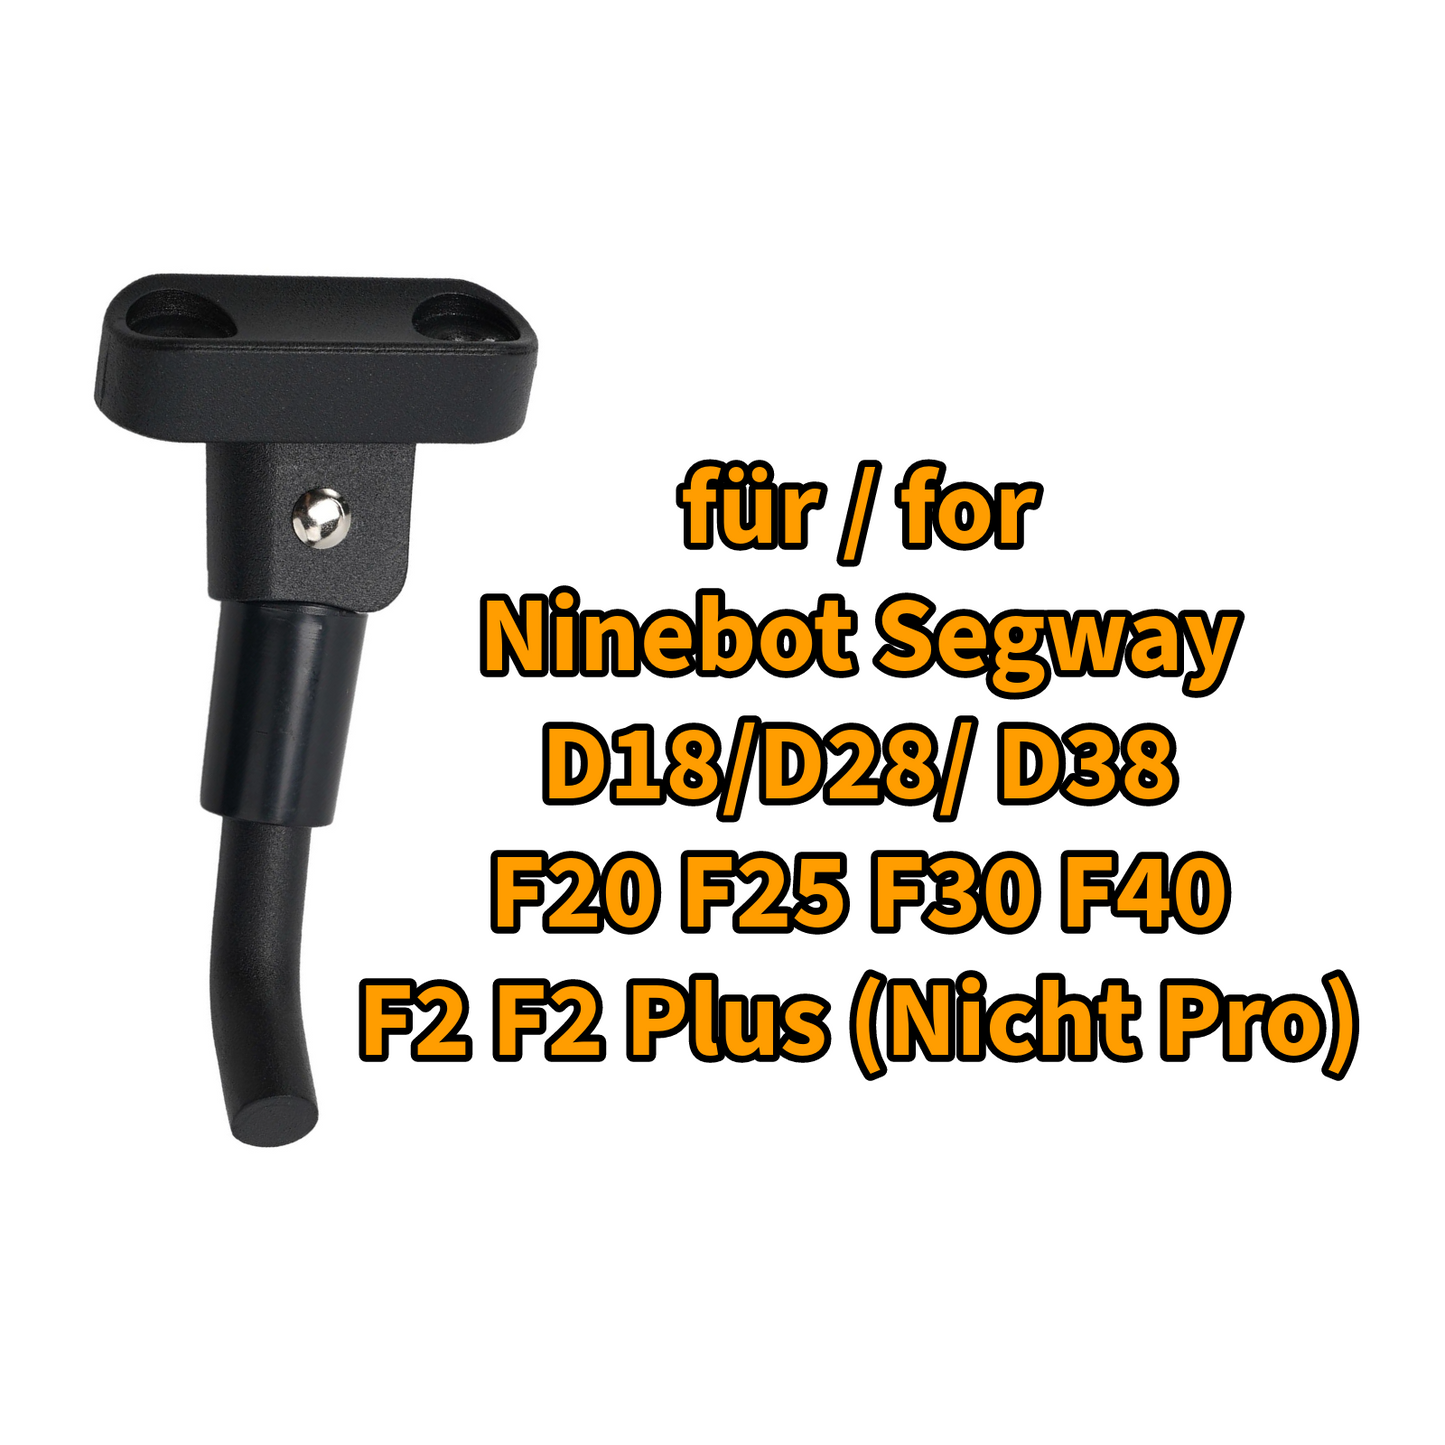 Ninebot Segway F2 F2 Plus side stand parking stand